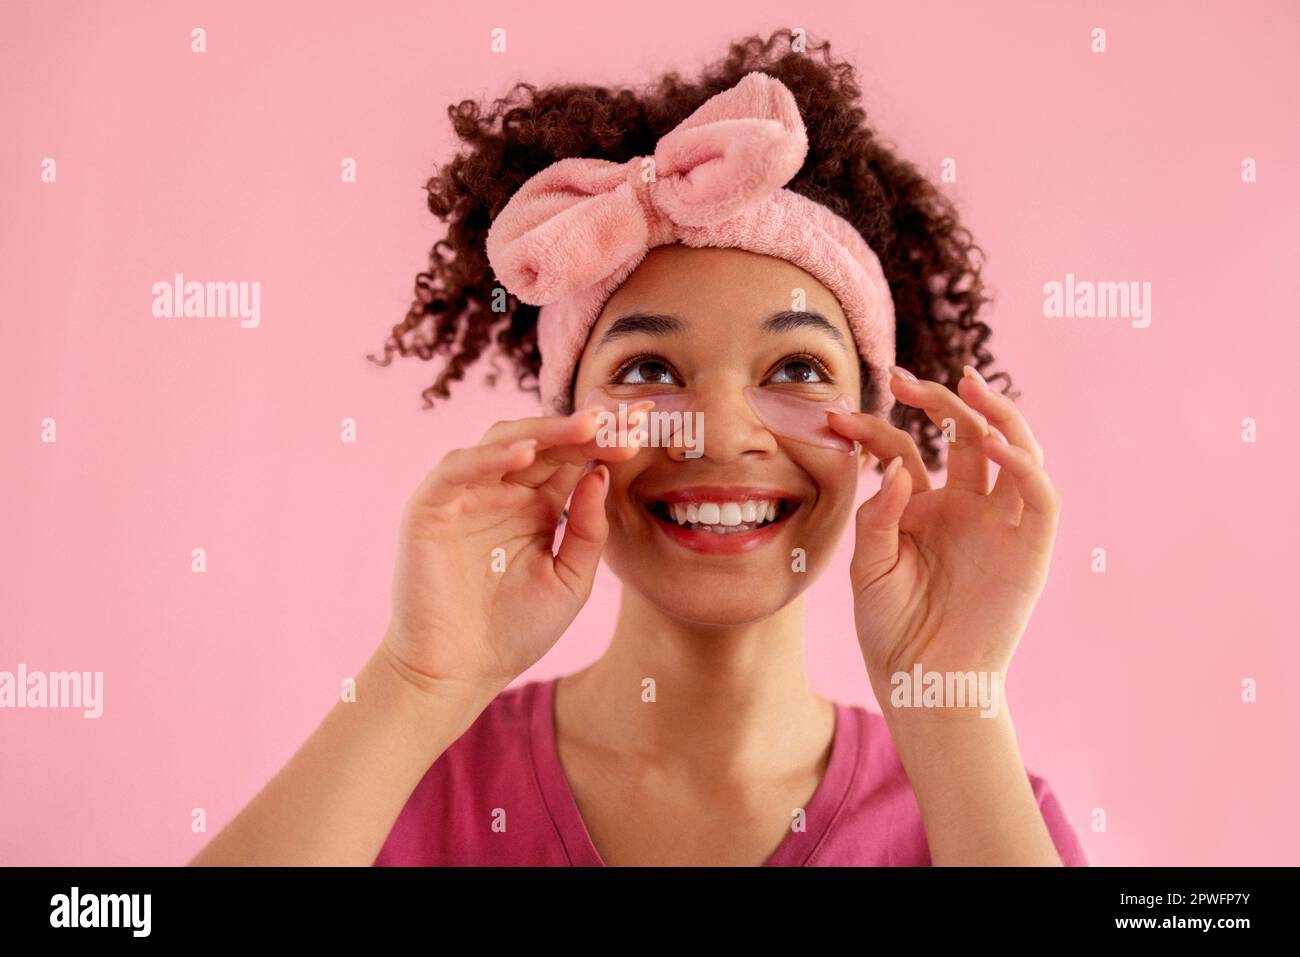 7. Mixed Race Girl Blue Hair Stock Photos, Pictures & Royalty-Free Images - Adobe Stock - wide 3